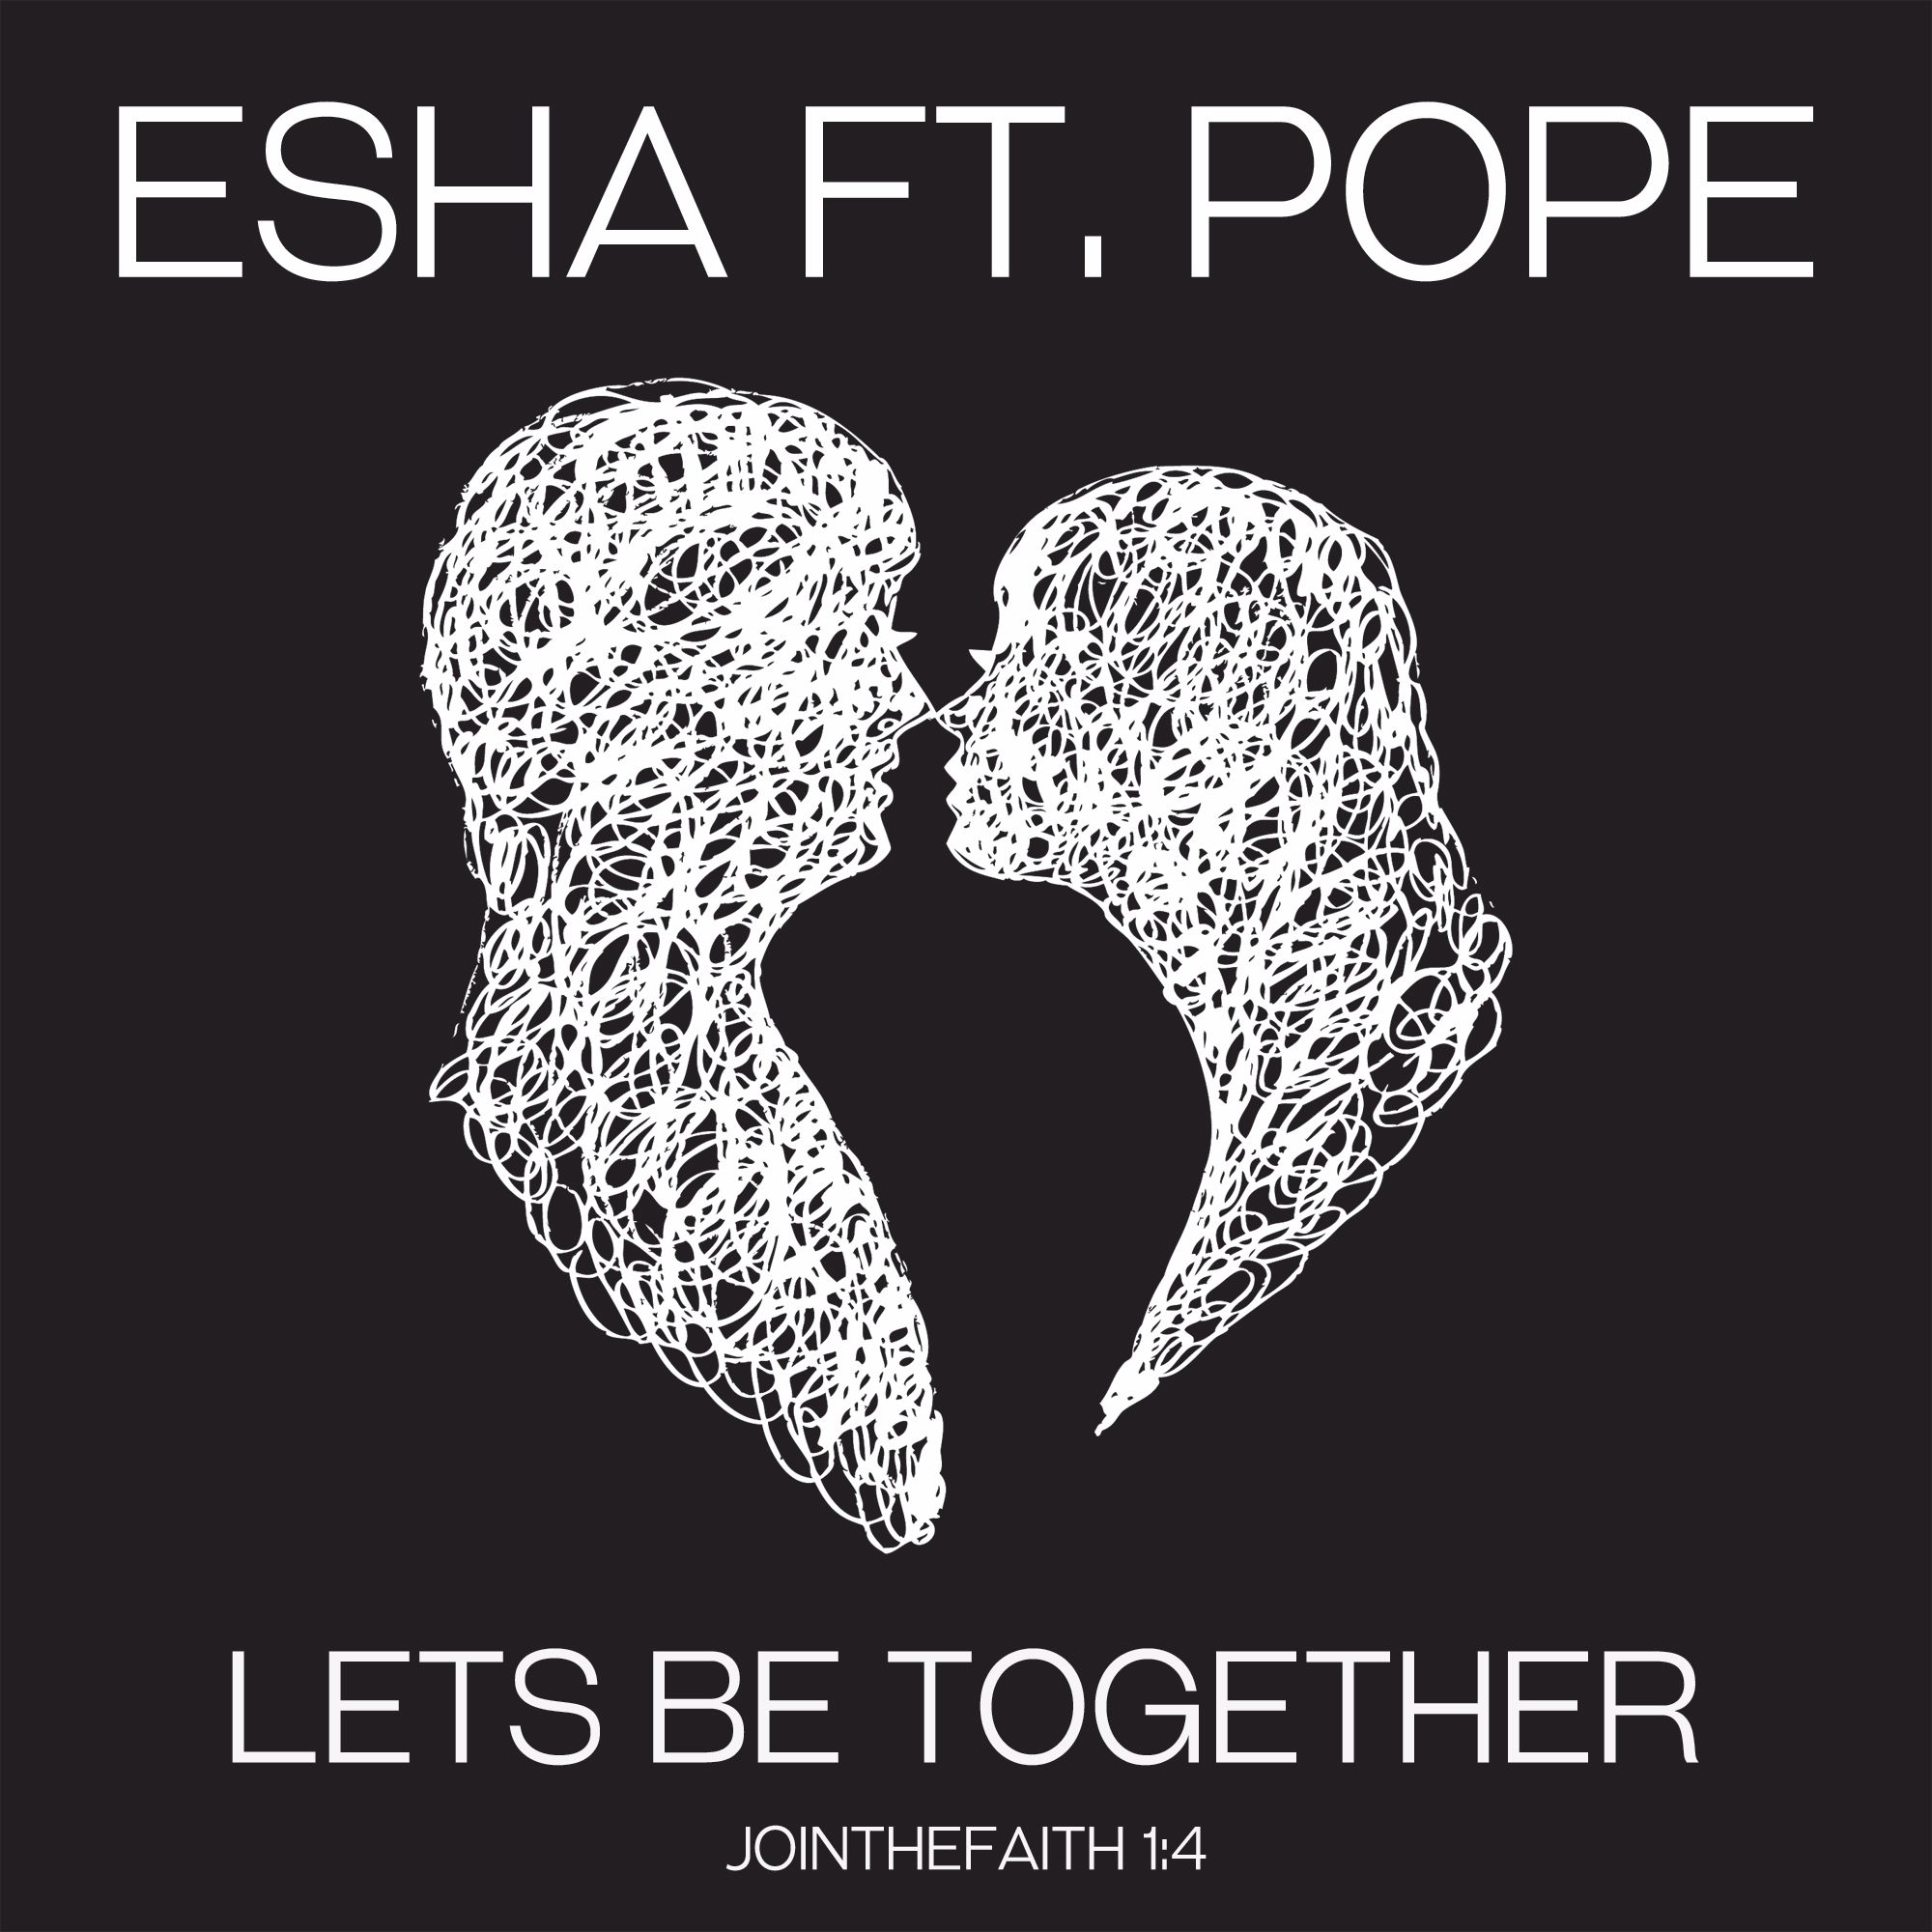 Scaricamento Esha Ft. Pope - Lets Be Together (#jointhefaith 1:4)